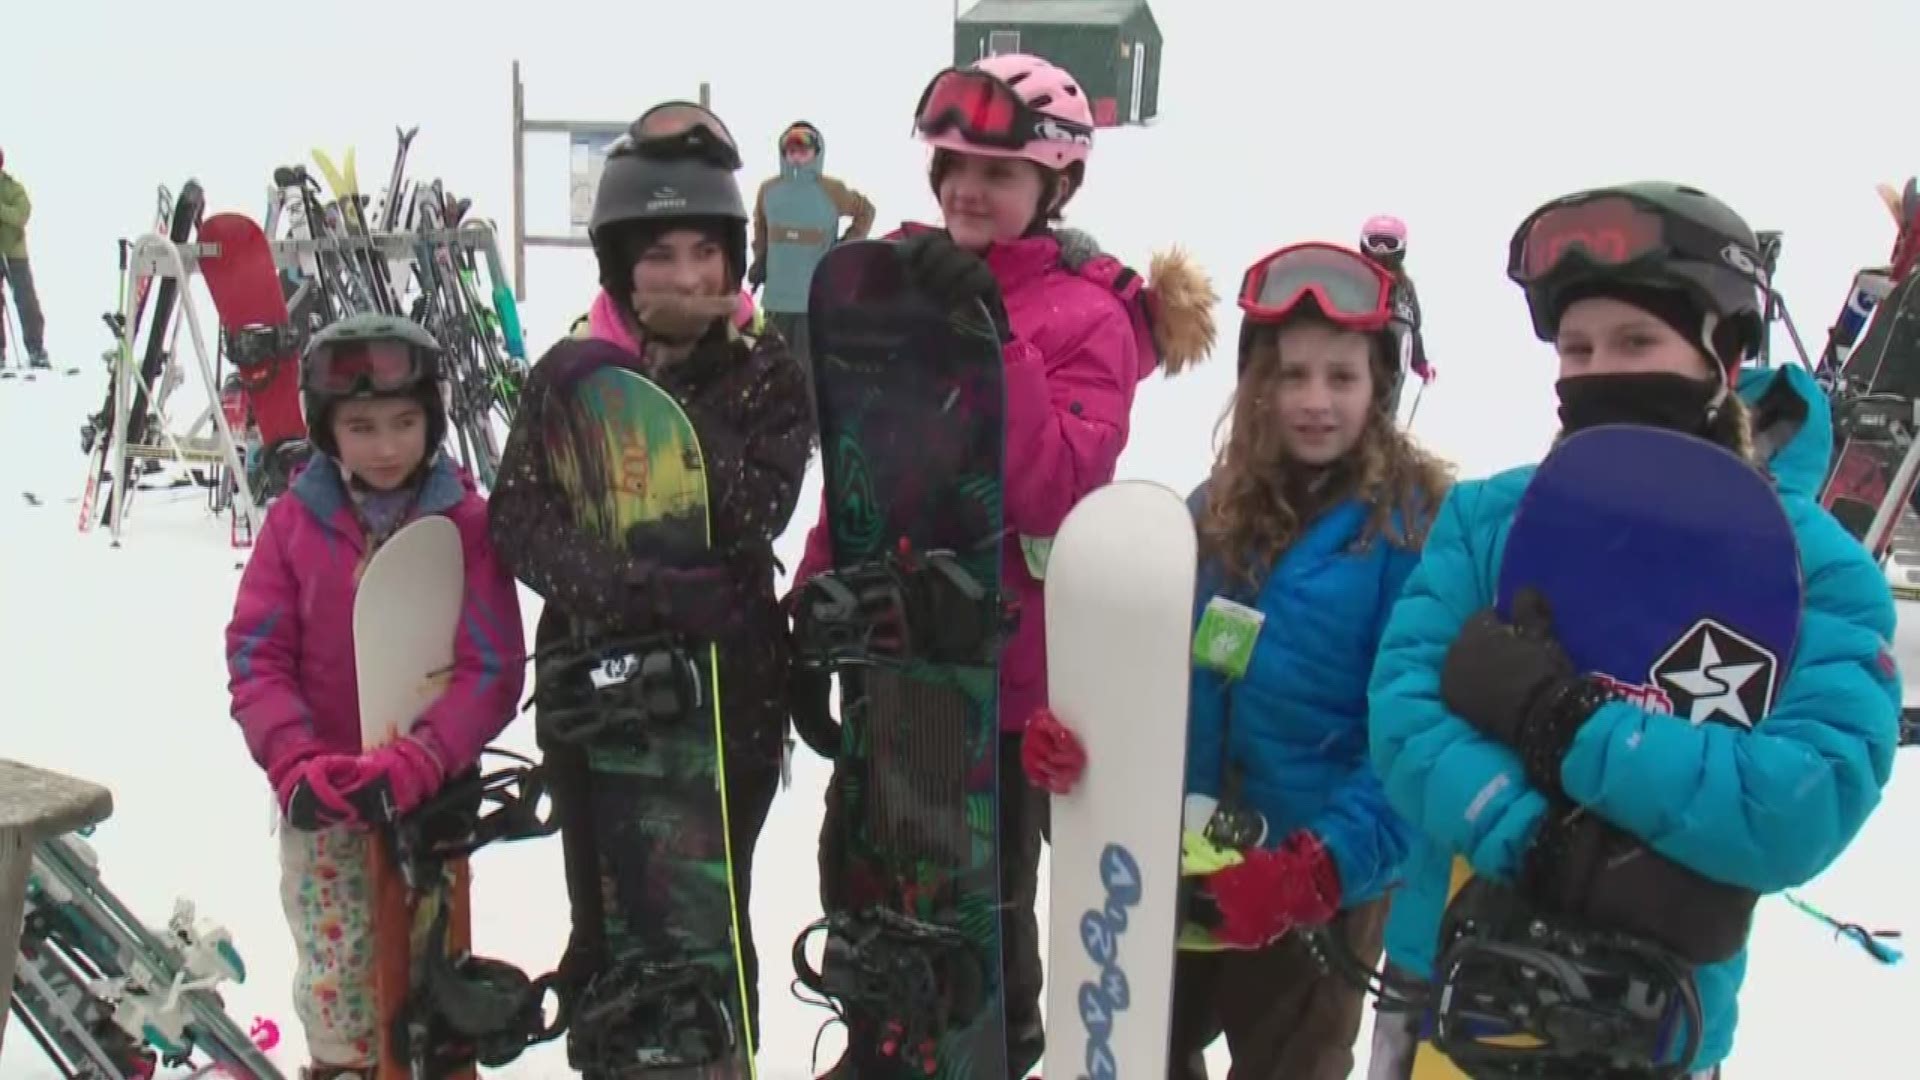 The Camden Snow Bowl is hoping to attract large crowds during school vacation week.